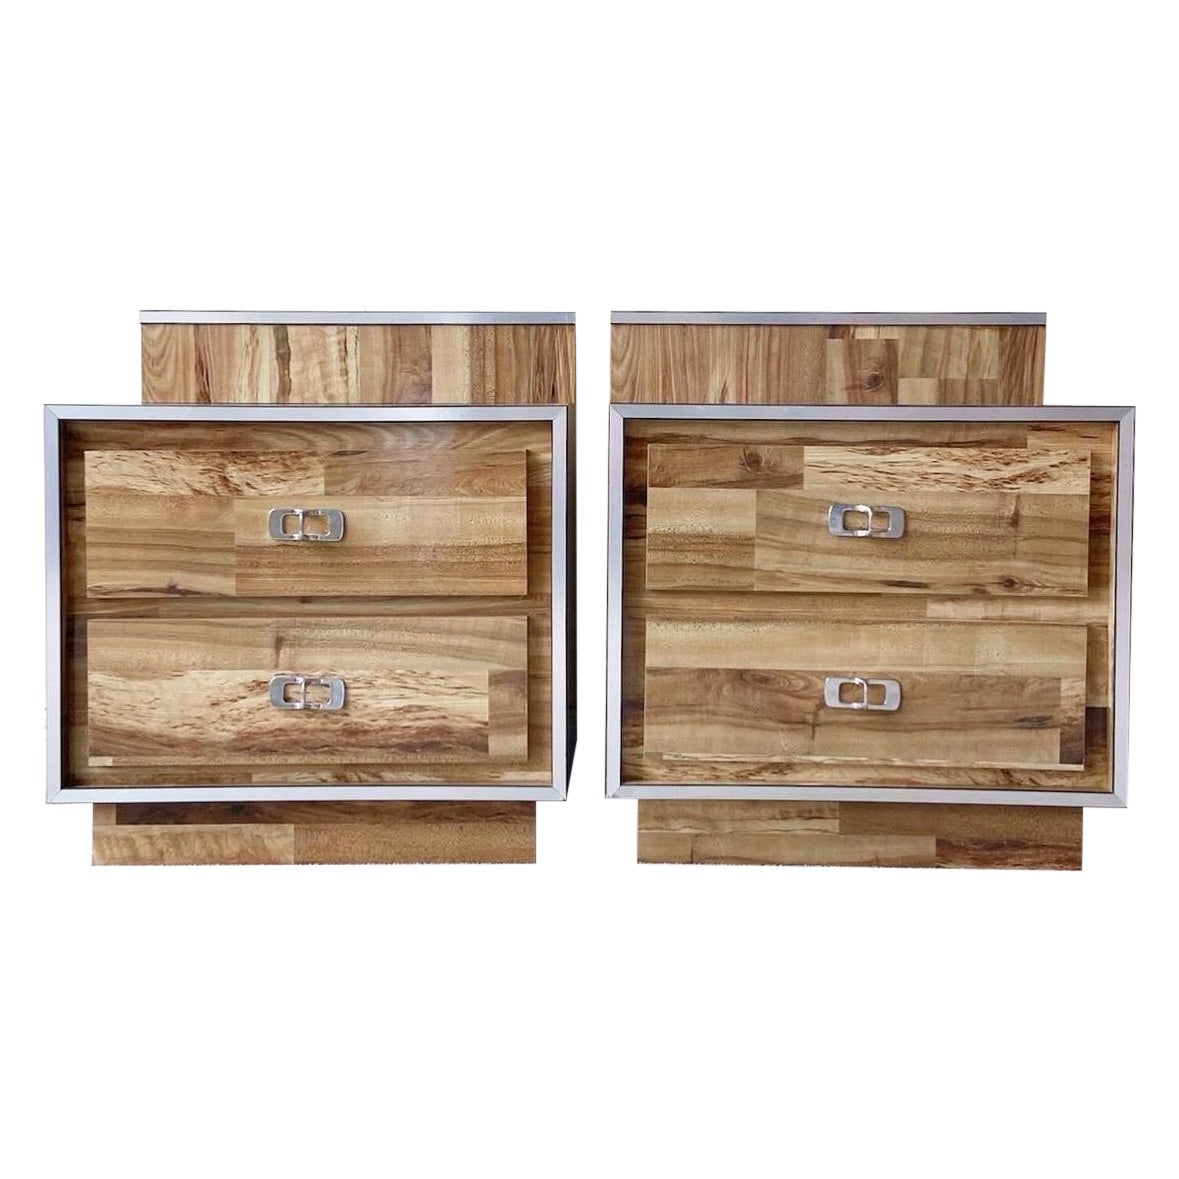 Postmodern Wood Grain Laminate Nightstands With Silver Accents - a Pair